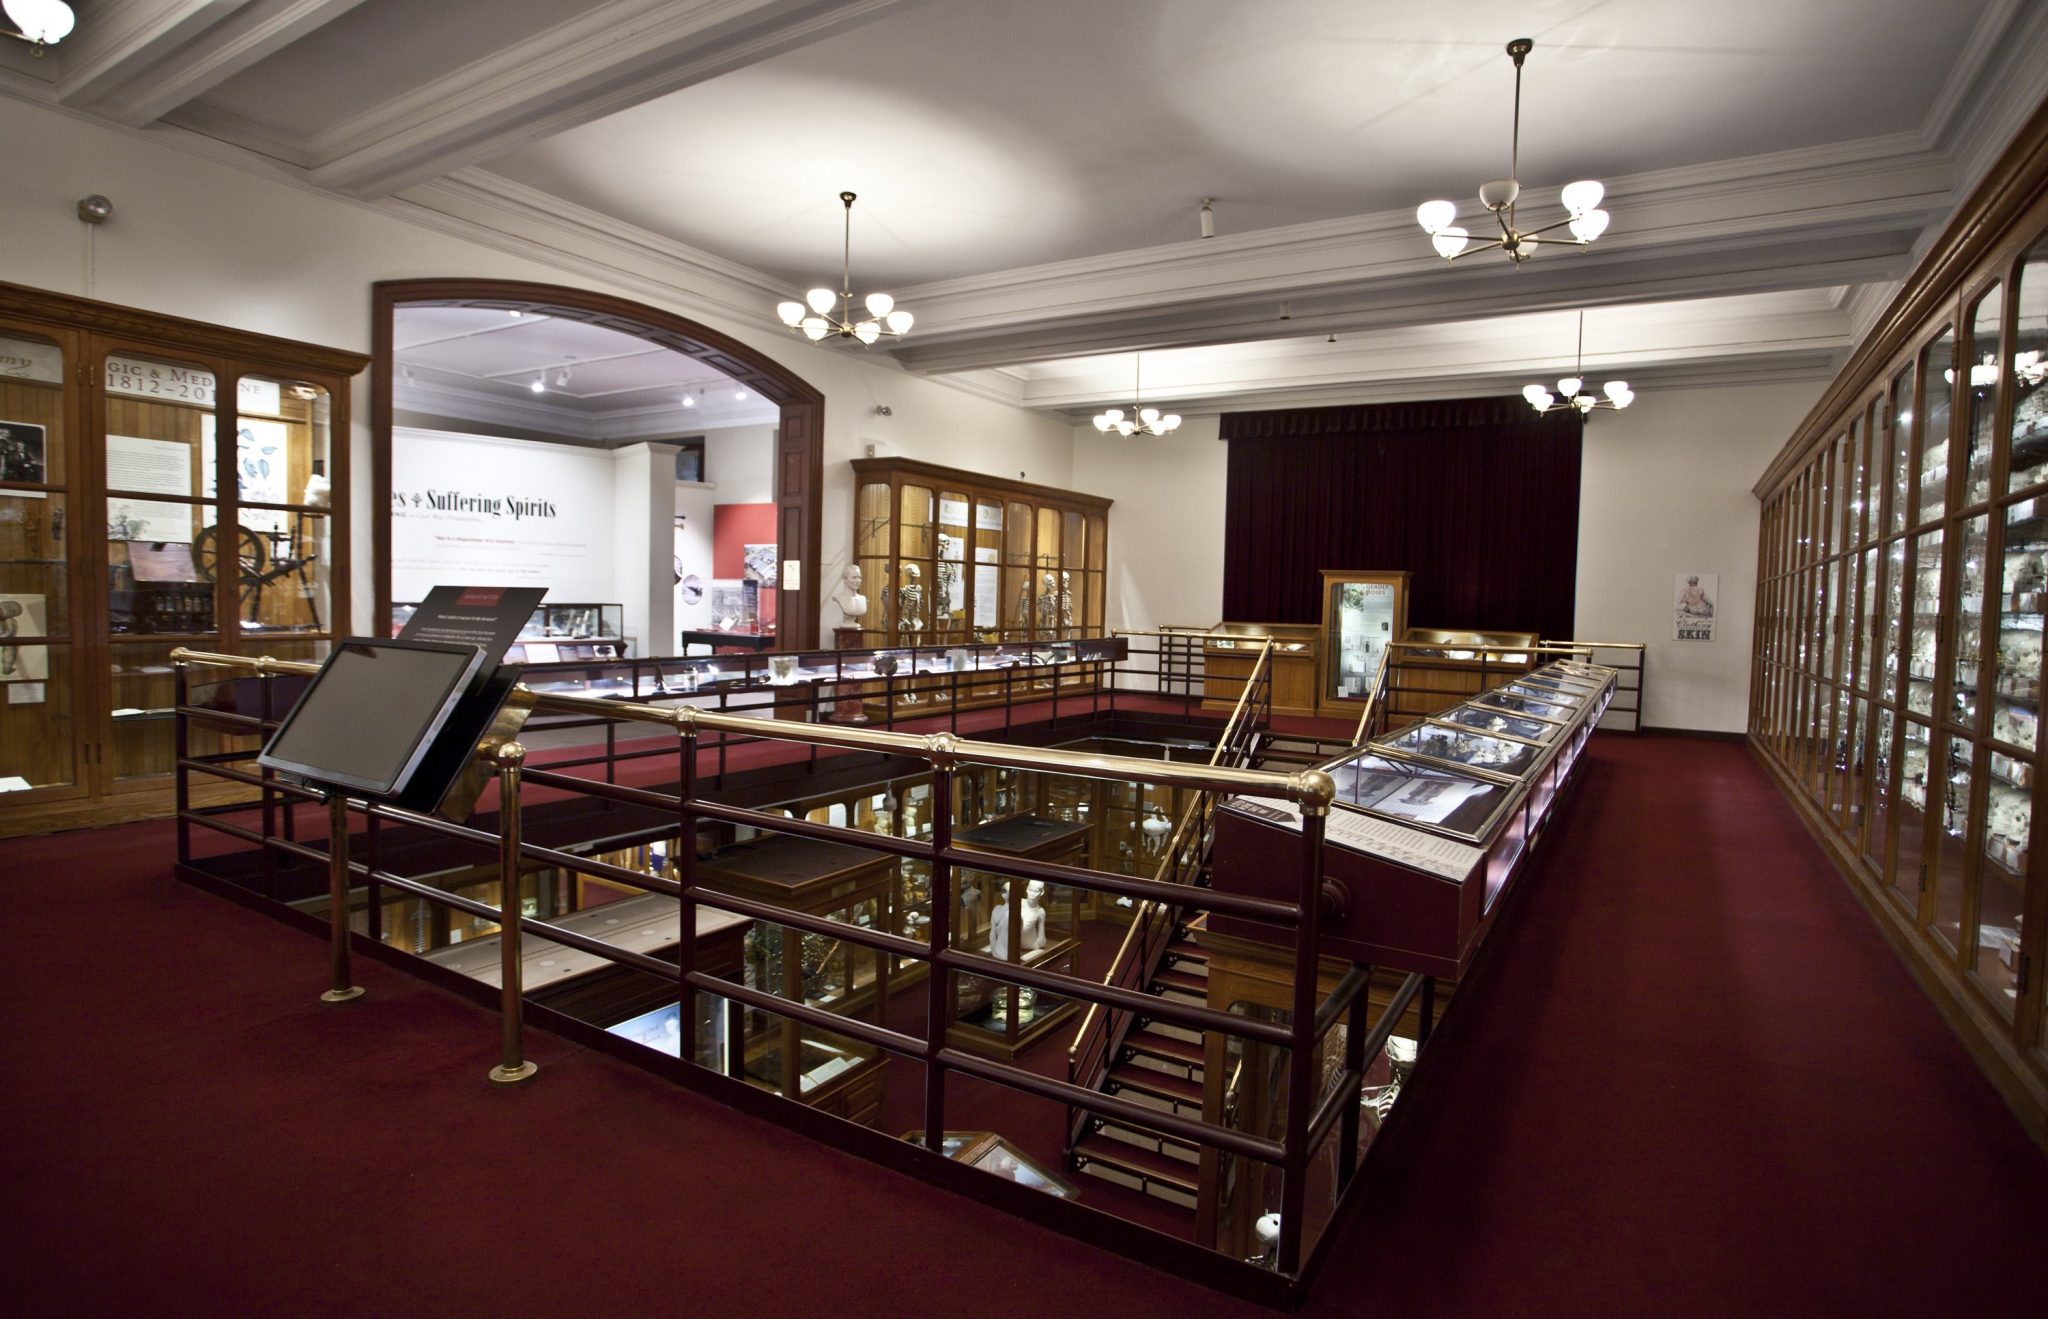 Display view from the Mutter Museum, 2017. Courtesy of the College of Physicians of Philadelphia